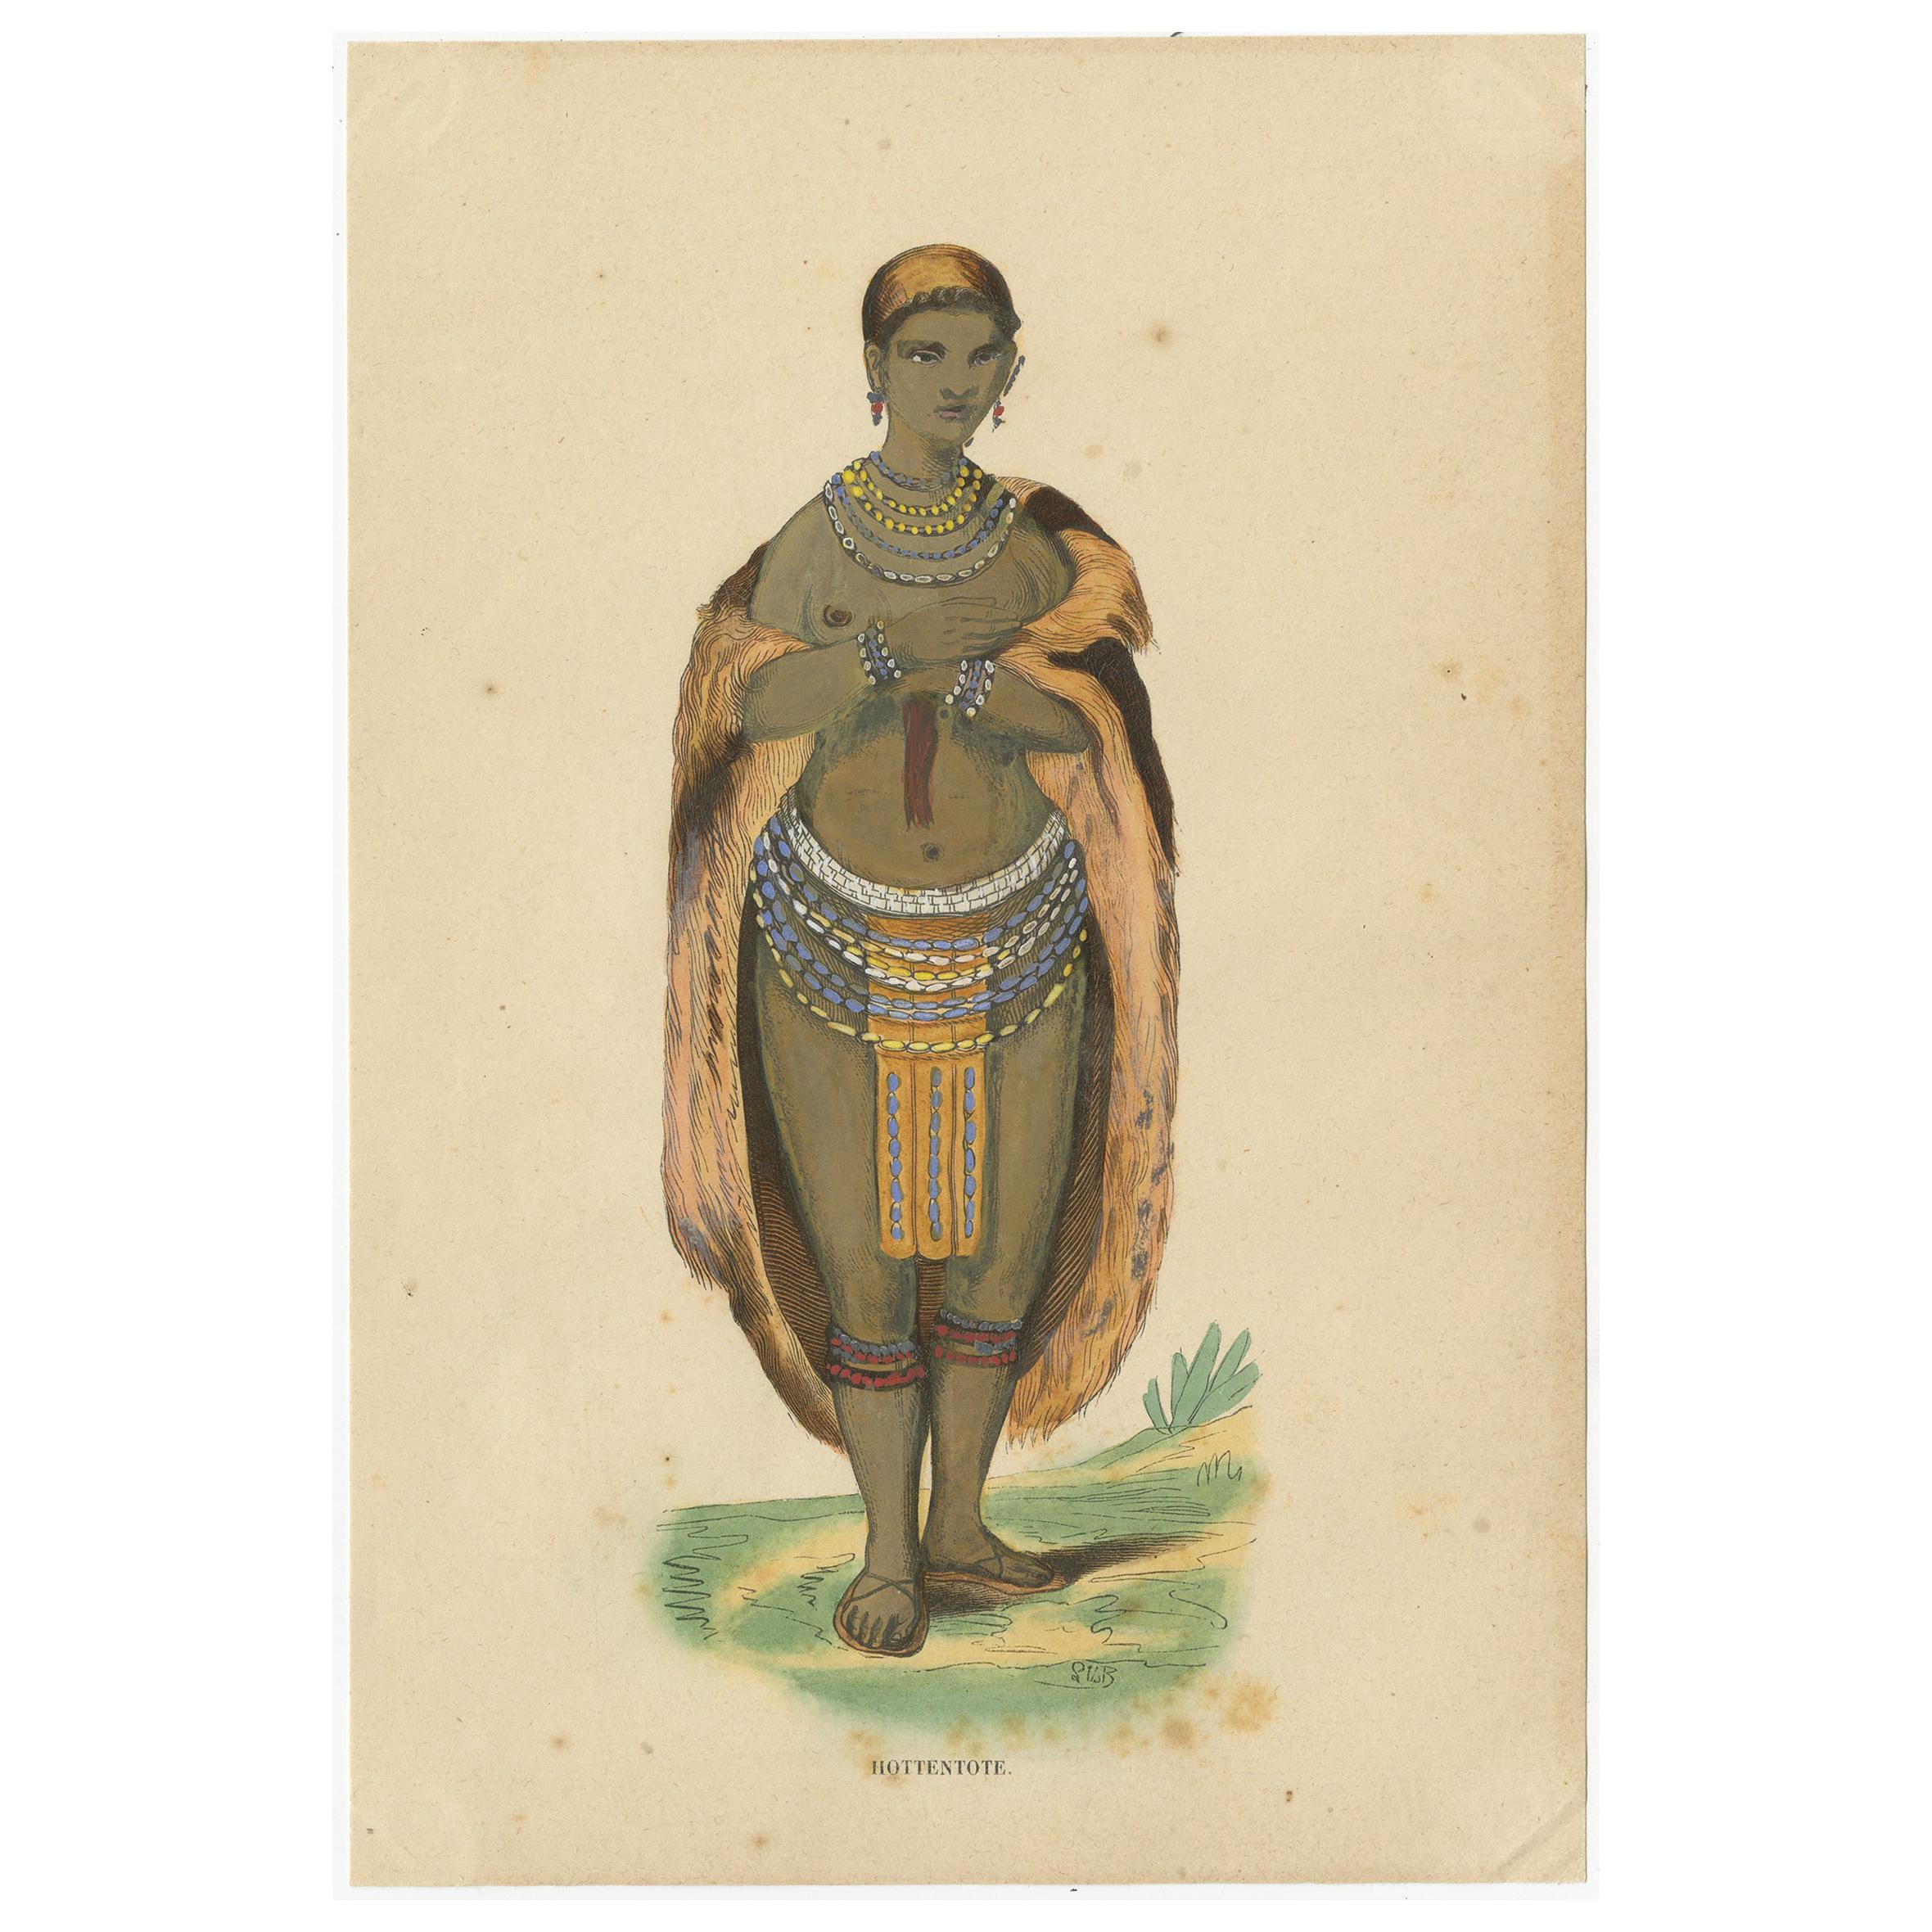 Antique Costume Print of a Female Khoikhoi by Wahlen, 1843